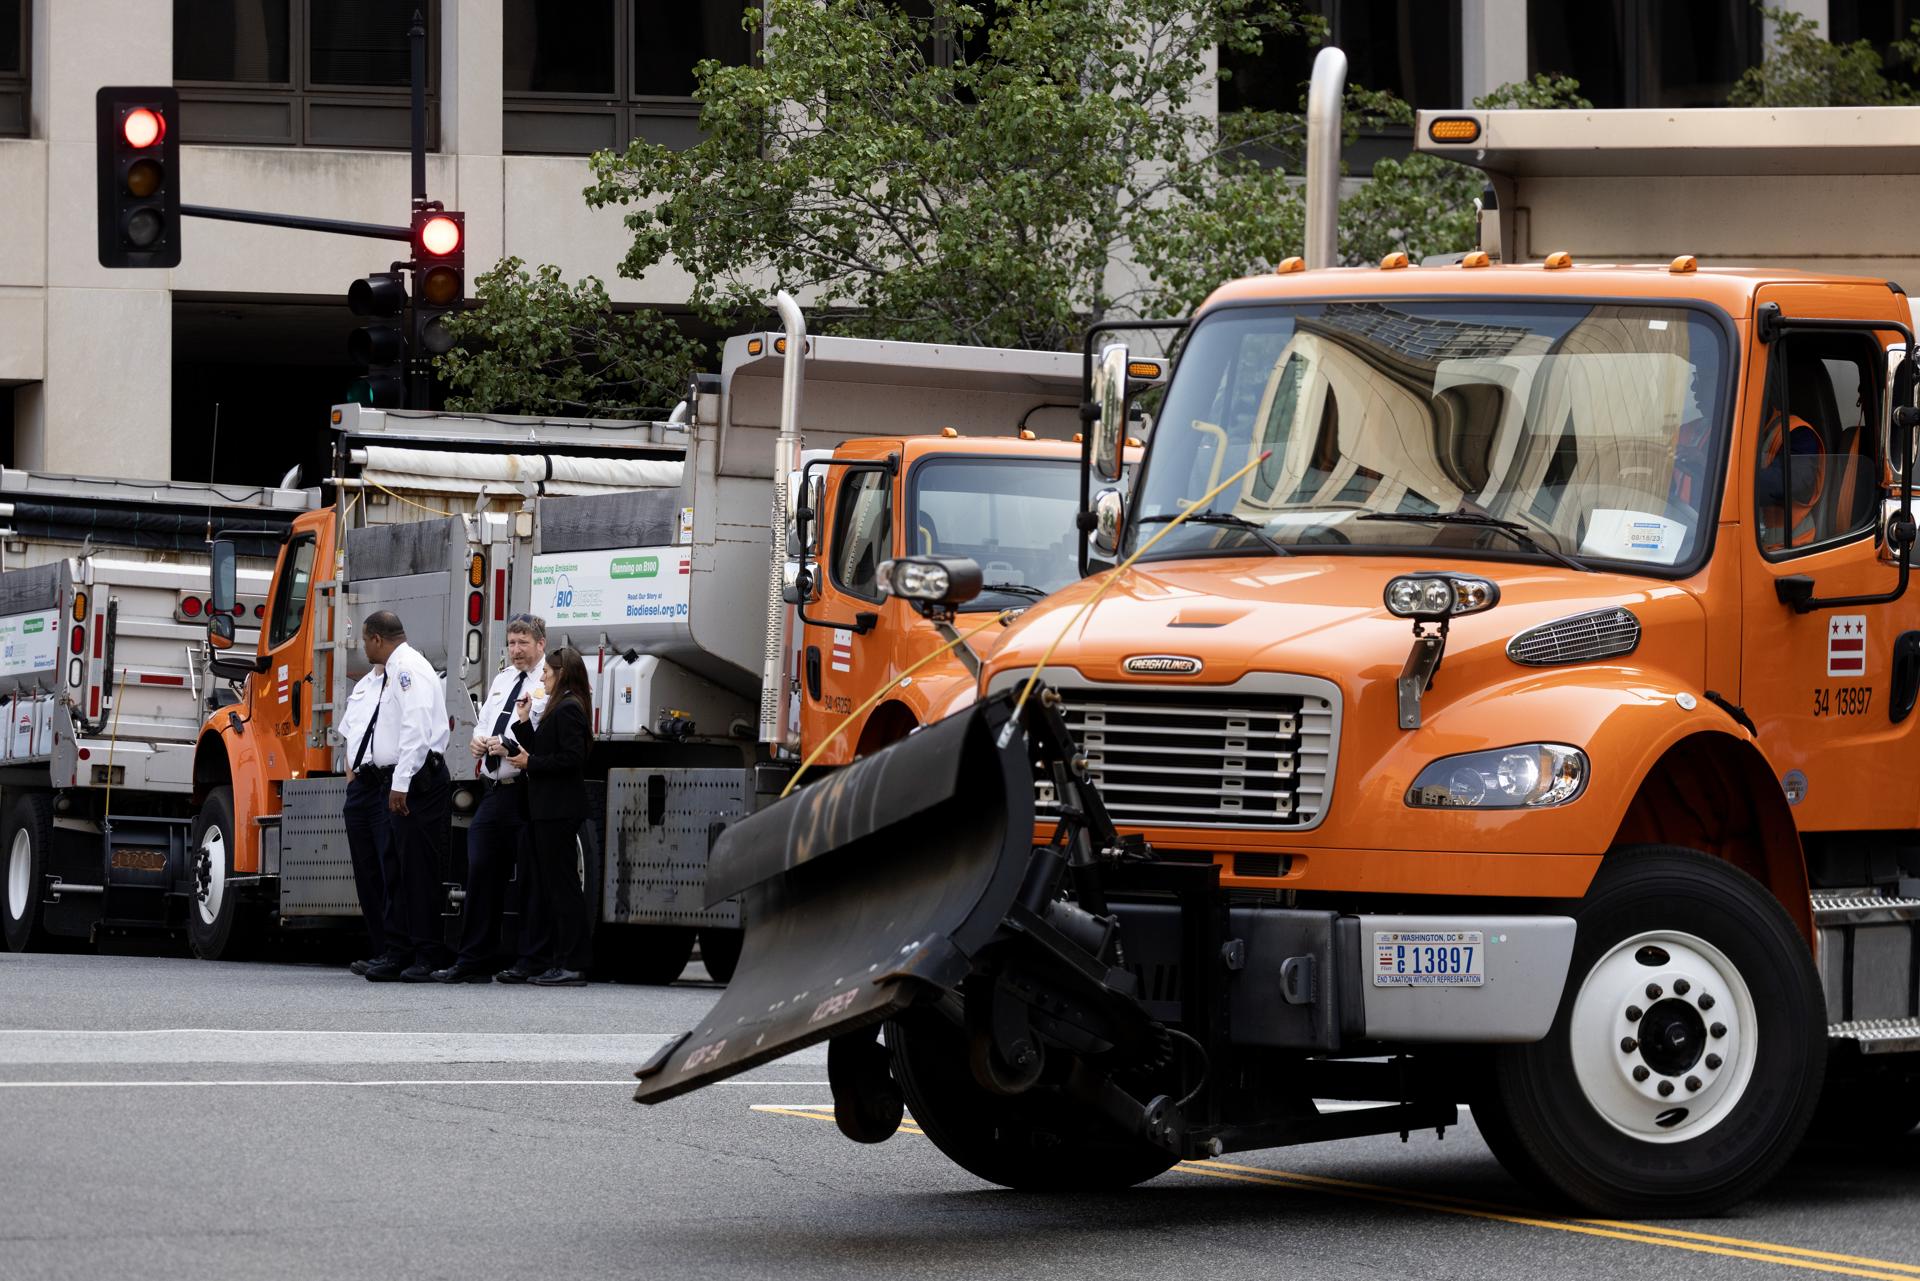 Dump trucks are parked on streets near the US federal courthouse in Washington on 3 August 2023 ahead of the arraignment of former President Donald Trump. EFE/EPA/MICHAEL REYNOLDS
Police stand guard outside the US federal courthouse in Washington on 3 August 2023 ahead of the arraignment of former President Donald Trump. EFE/EPA/MICHAEL REYNOLDS
EFE/EPA/MICHAEL REYNOLDS